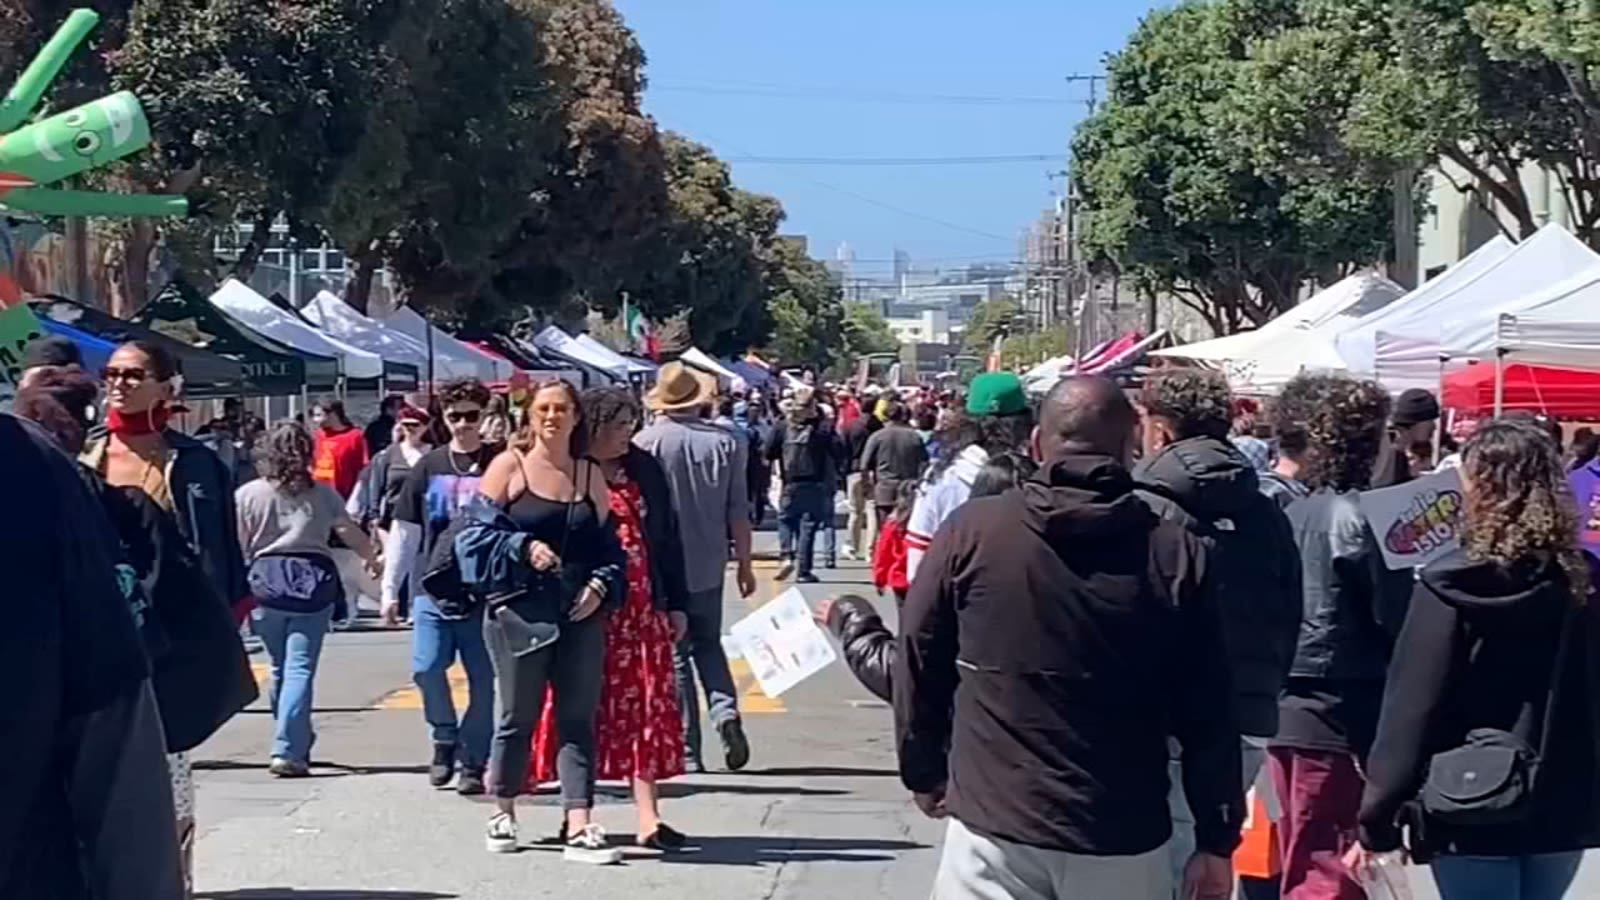 SF celebrates another year of Carnaval, highlighting Latin and Indigenous community